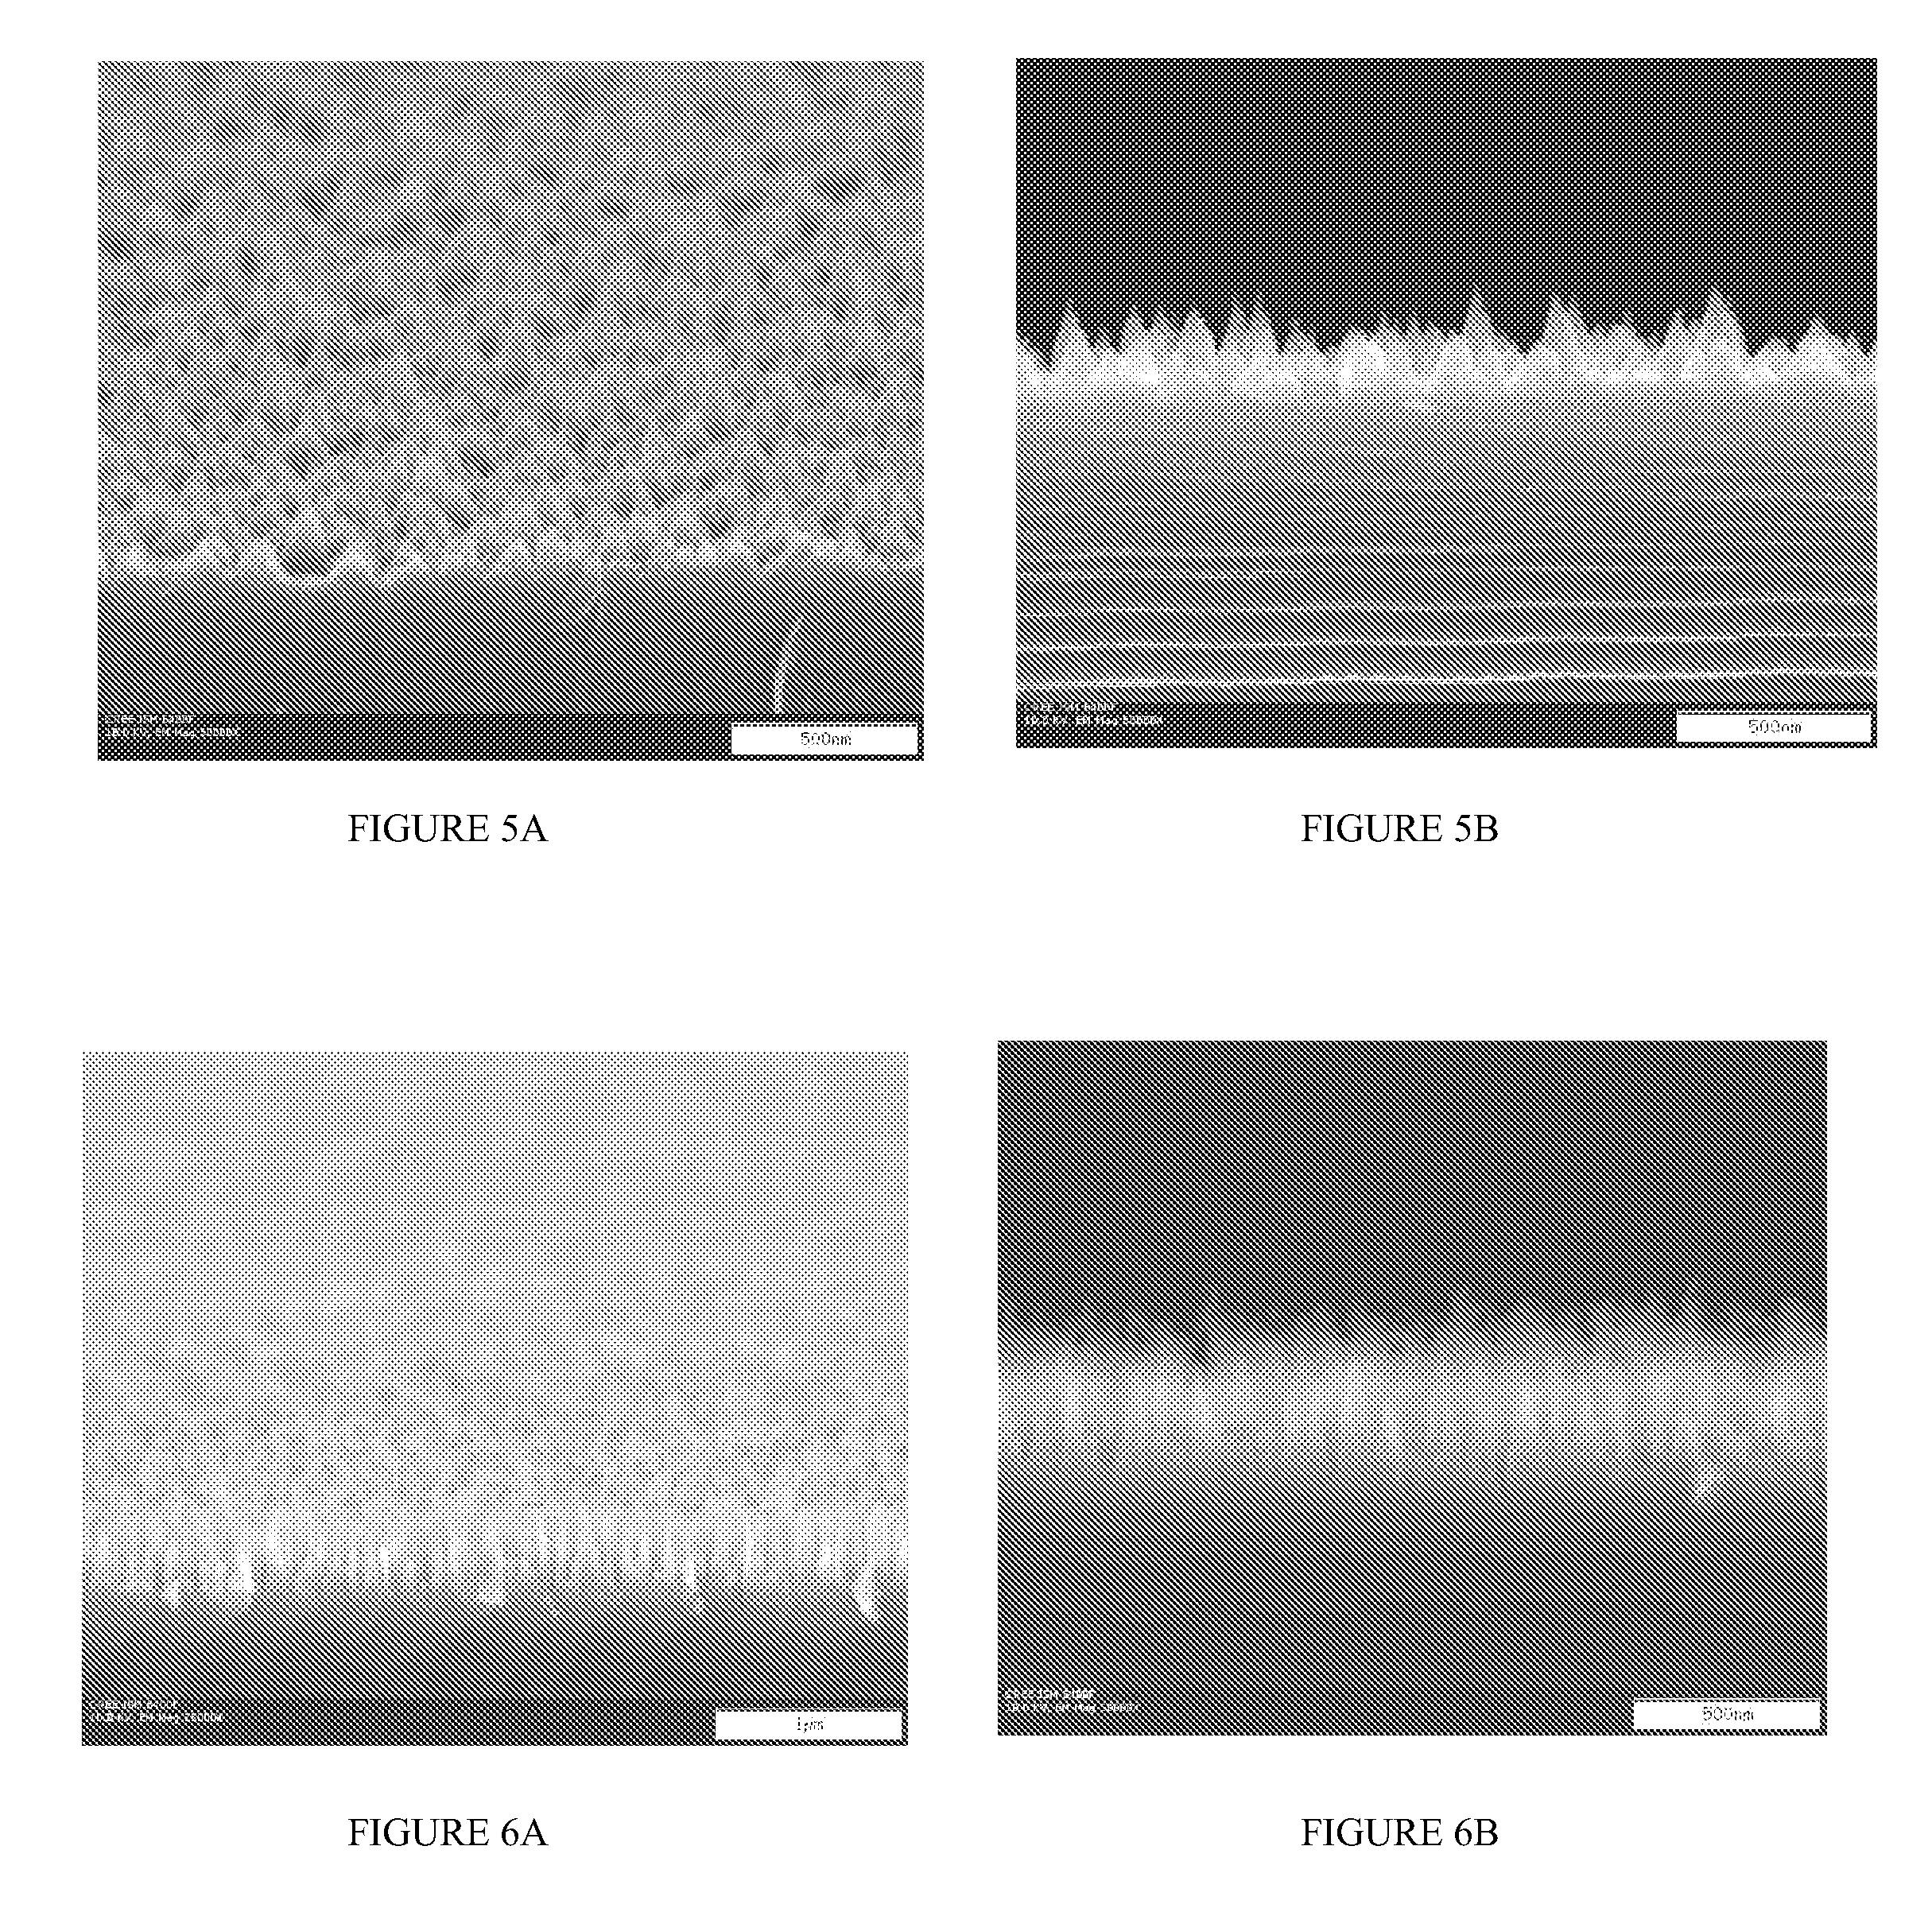 Semiconductor devices having low threading dislocations and improved light extraction and methods of making the same